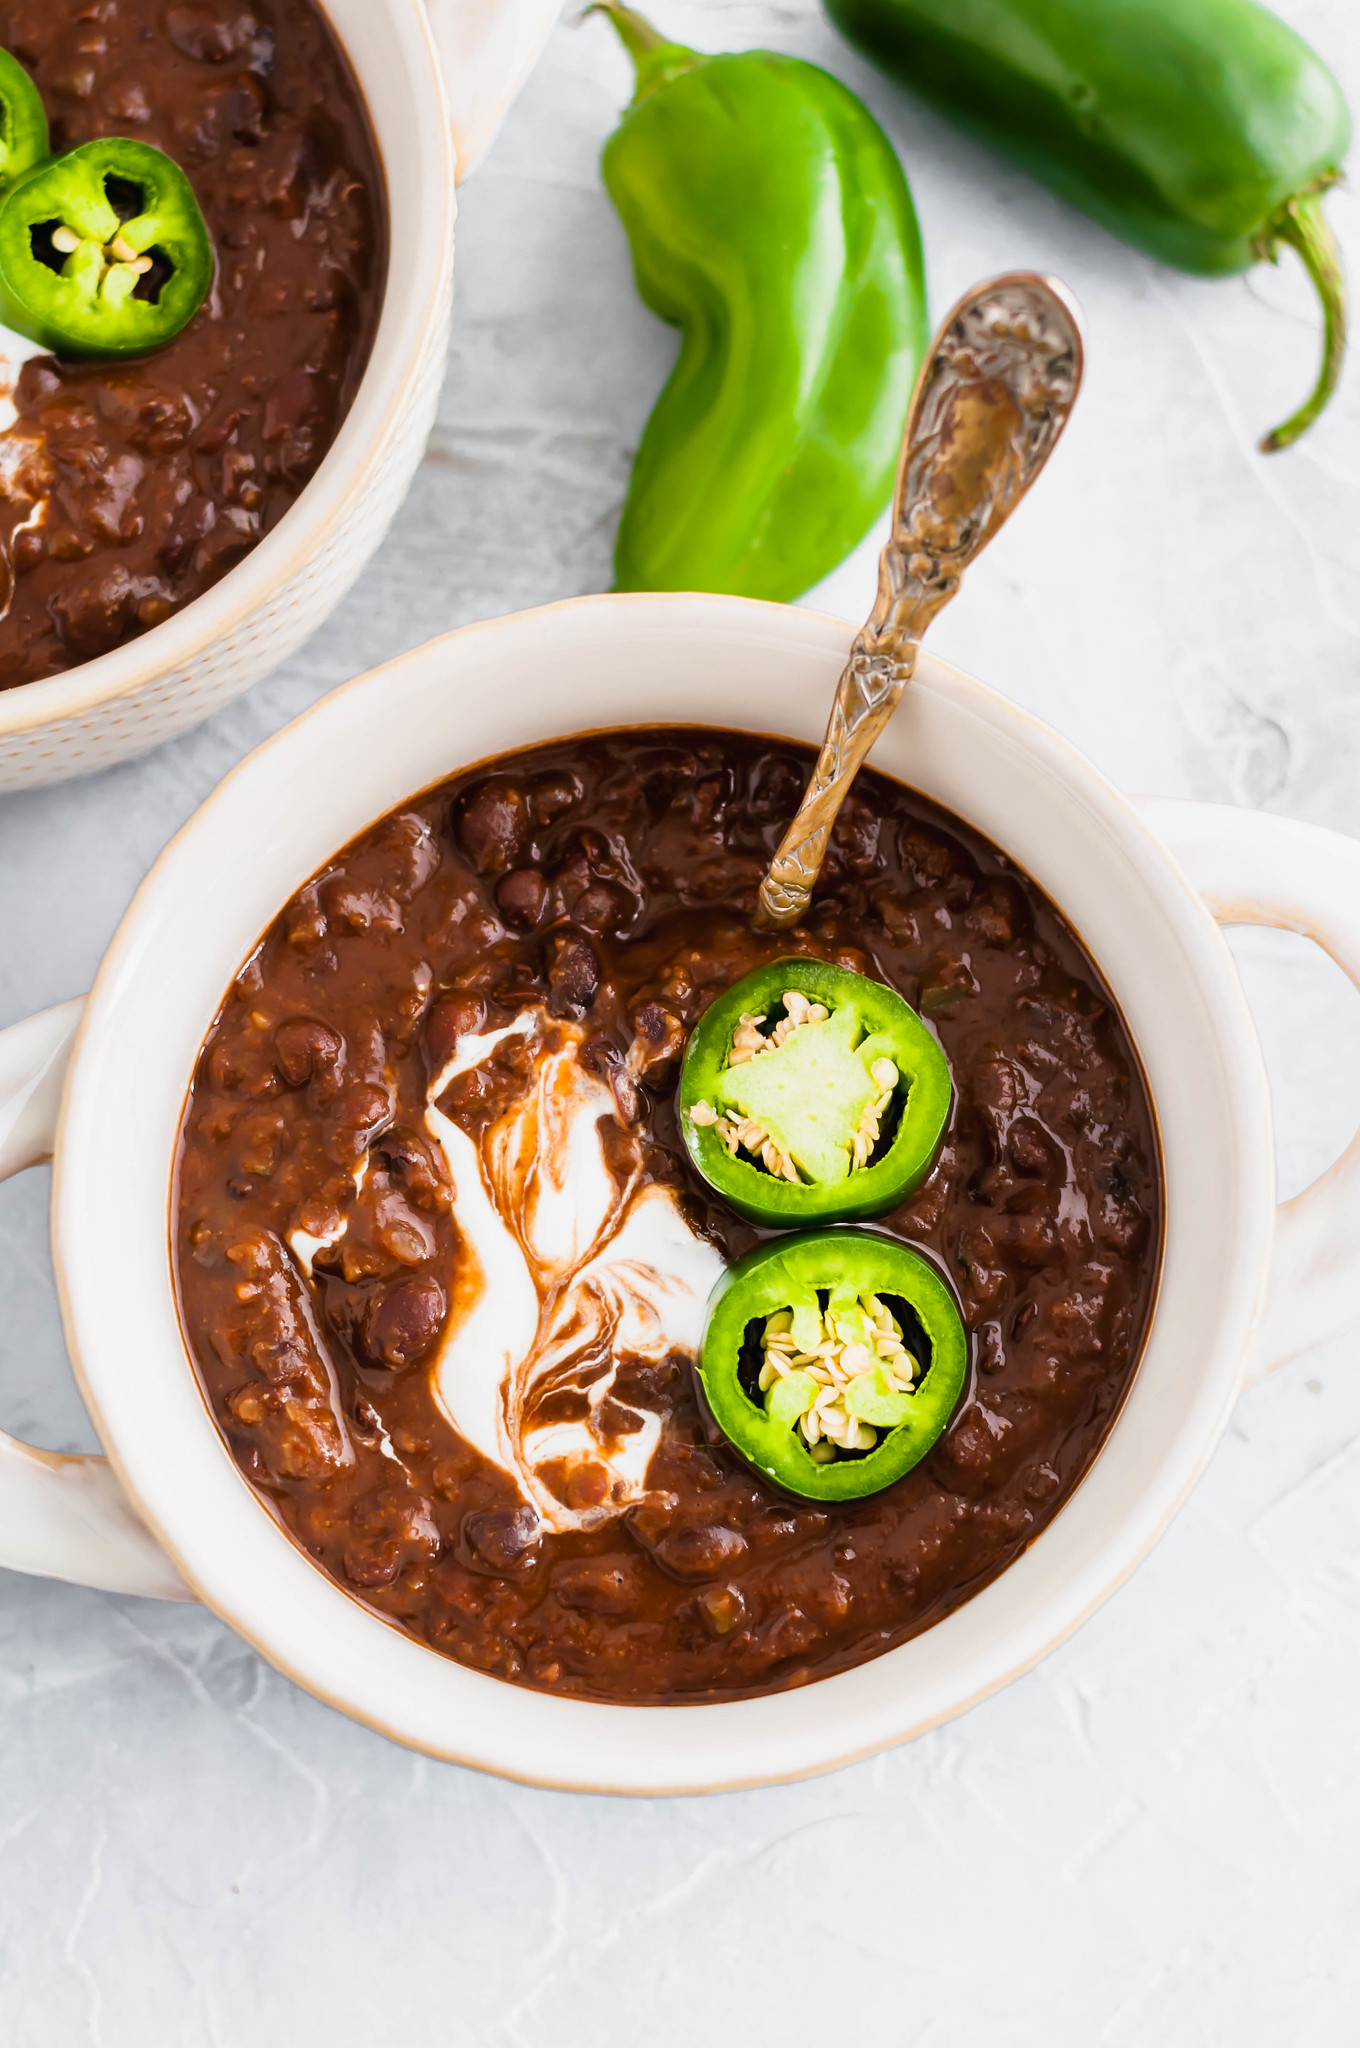 Don't let the falling temperatures bring you down. This Spicy Black Bean Soup is just what you this fall and winter to keep you warm and cozy.